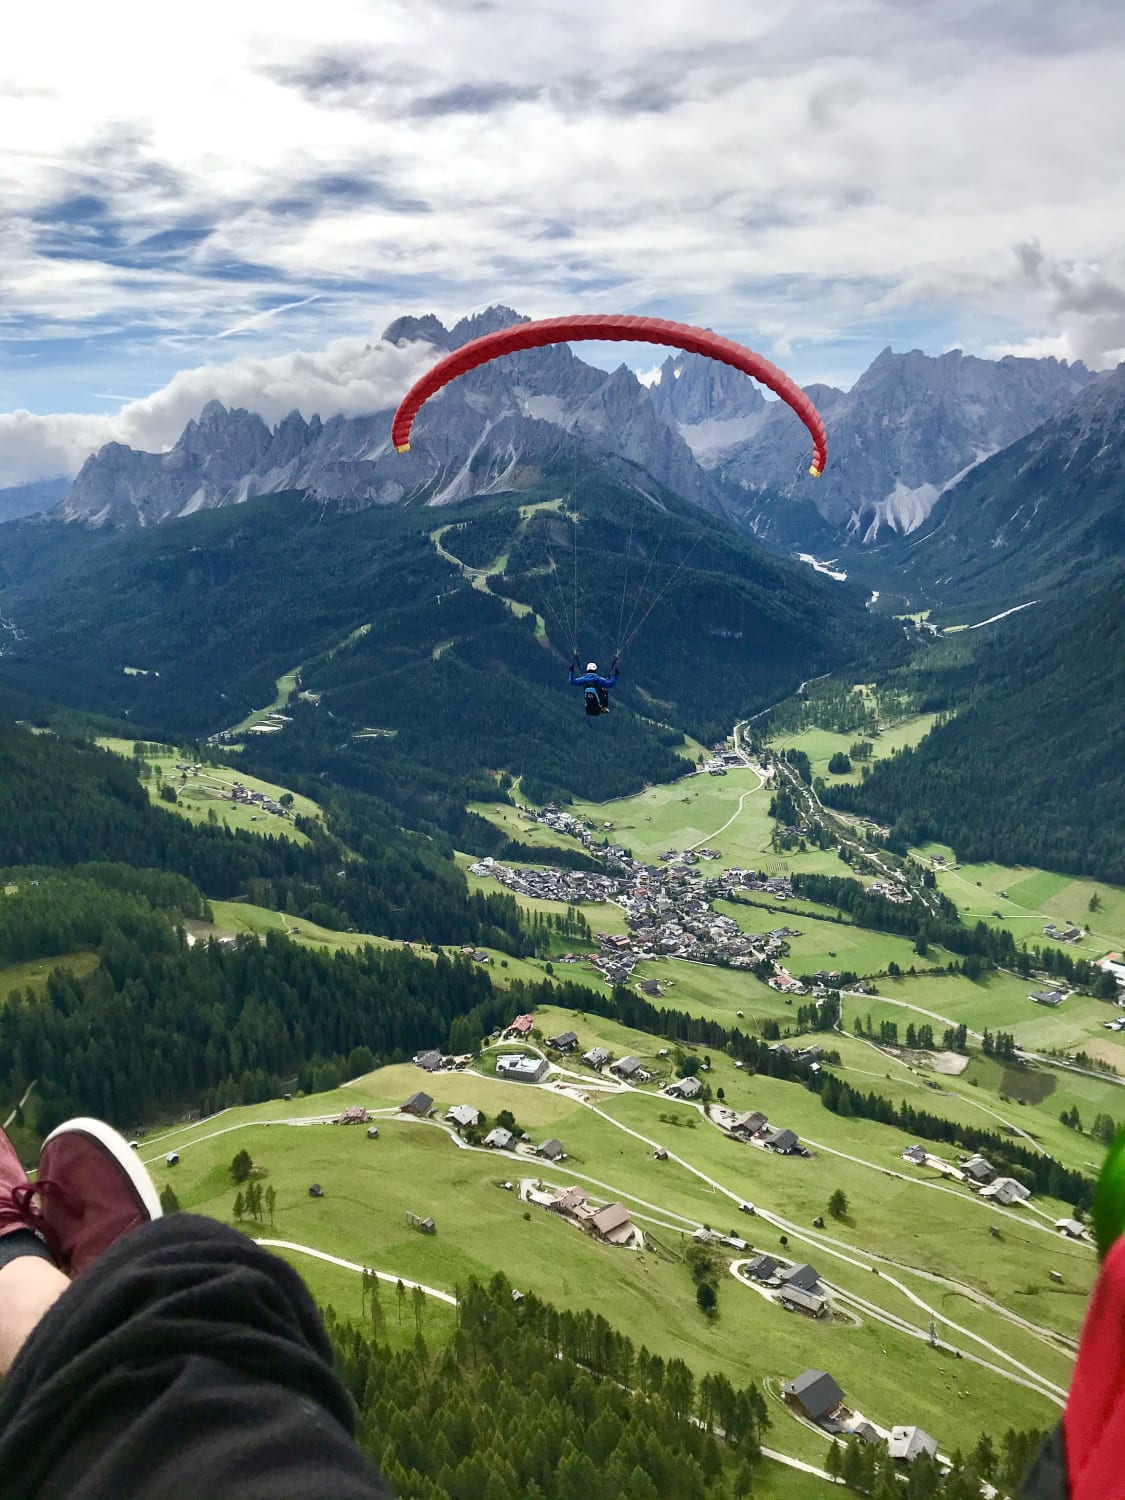 Me and my brother paragliding in the italian Alps.